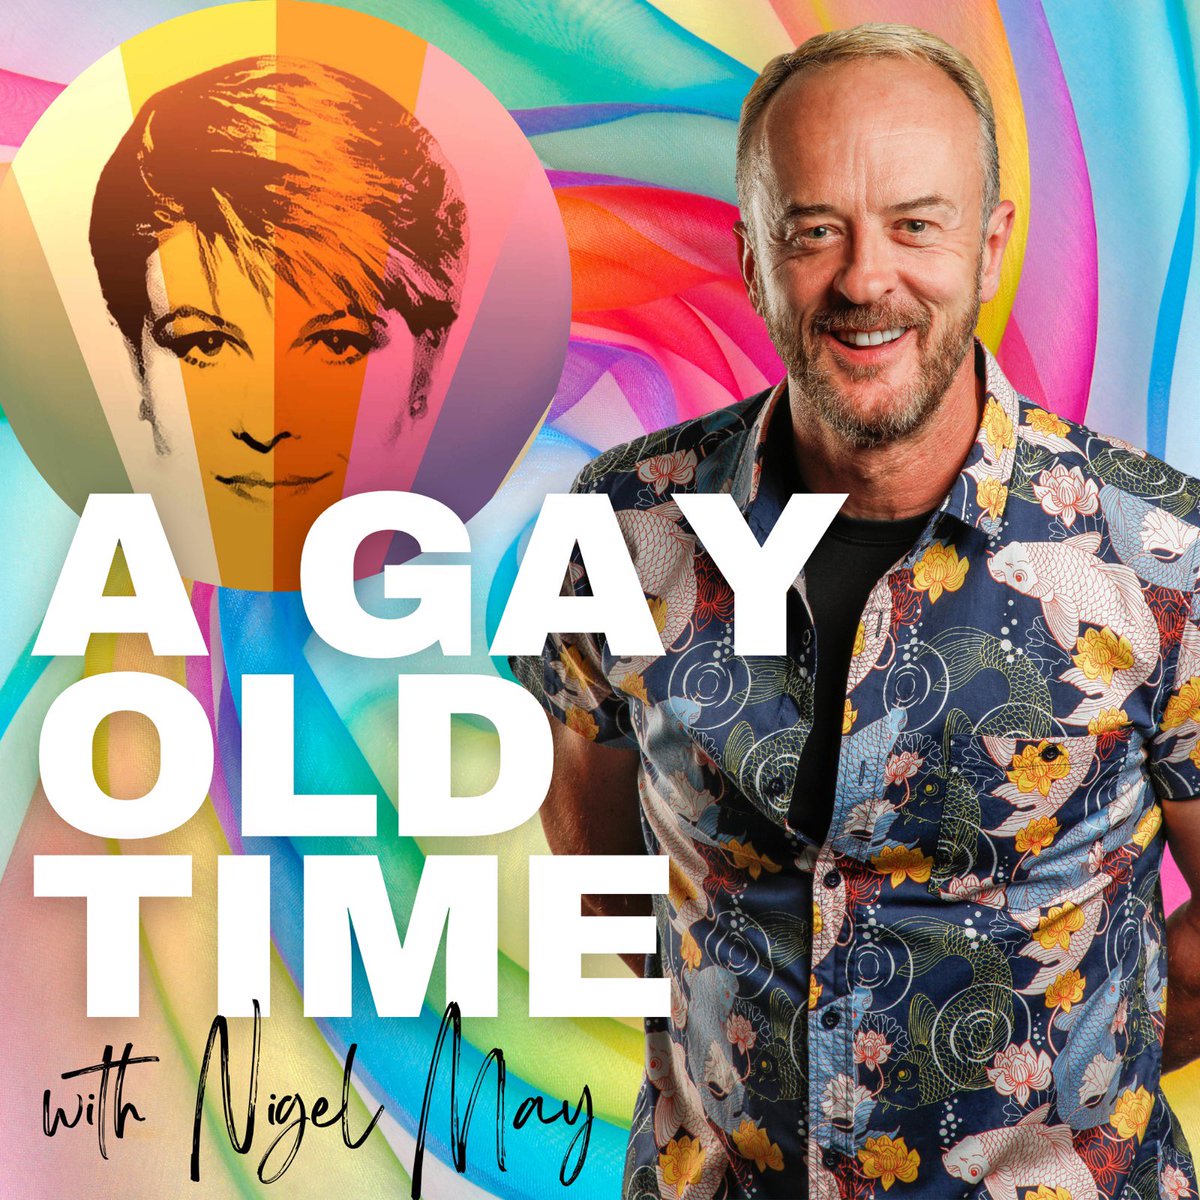 Next episode of @agayoldtimepod is here. My guest is iconic pop singer @HazellHD celebrating 40 years of Searchin’ (I Gotta Find A Man) & a @CheerUpPopParty show. Hazell is a proud gay woman, patron of @PrideInSurrey & a massive trans ally. @SP_Music_Label open.spotify.com/episode/5sZi4B…